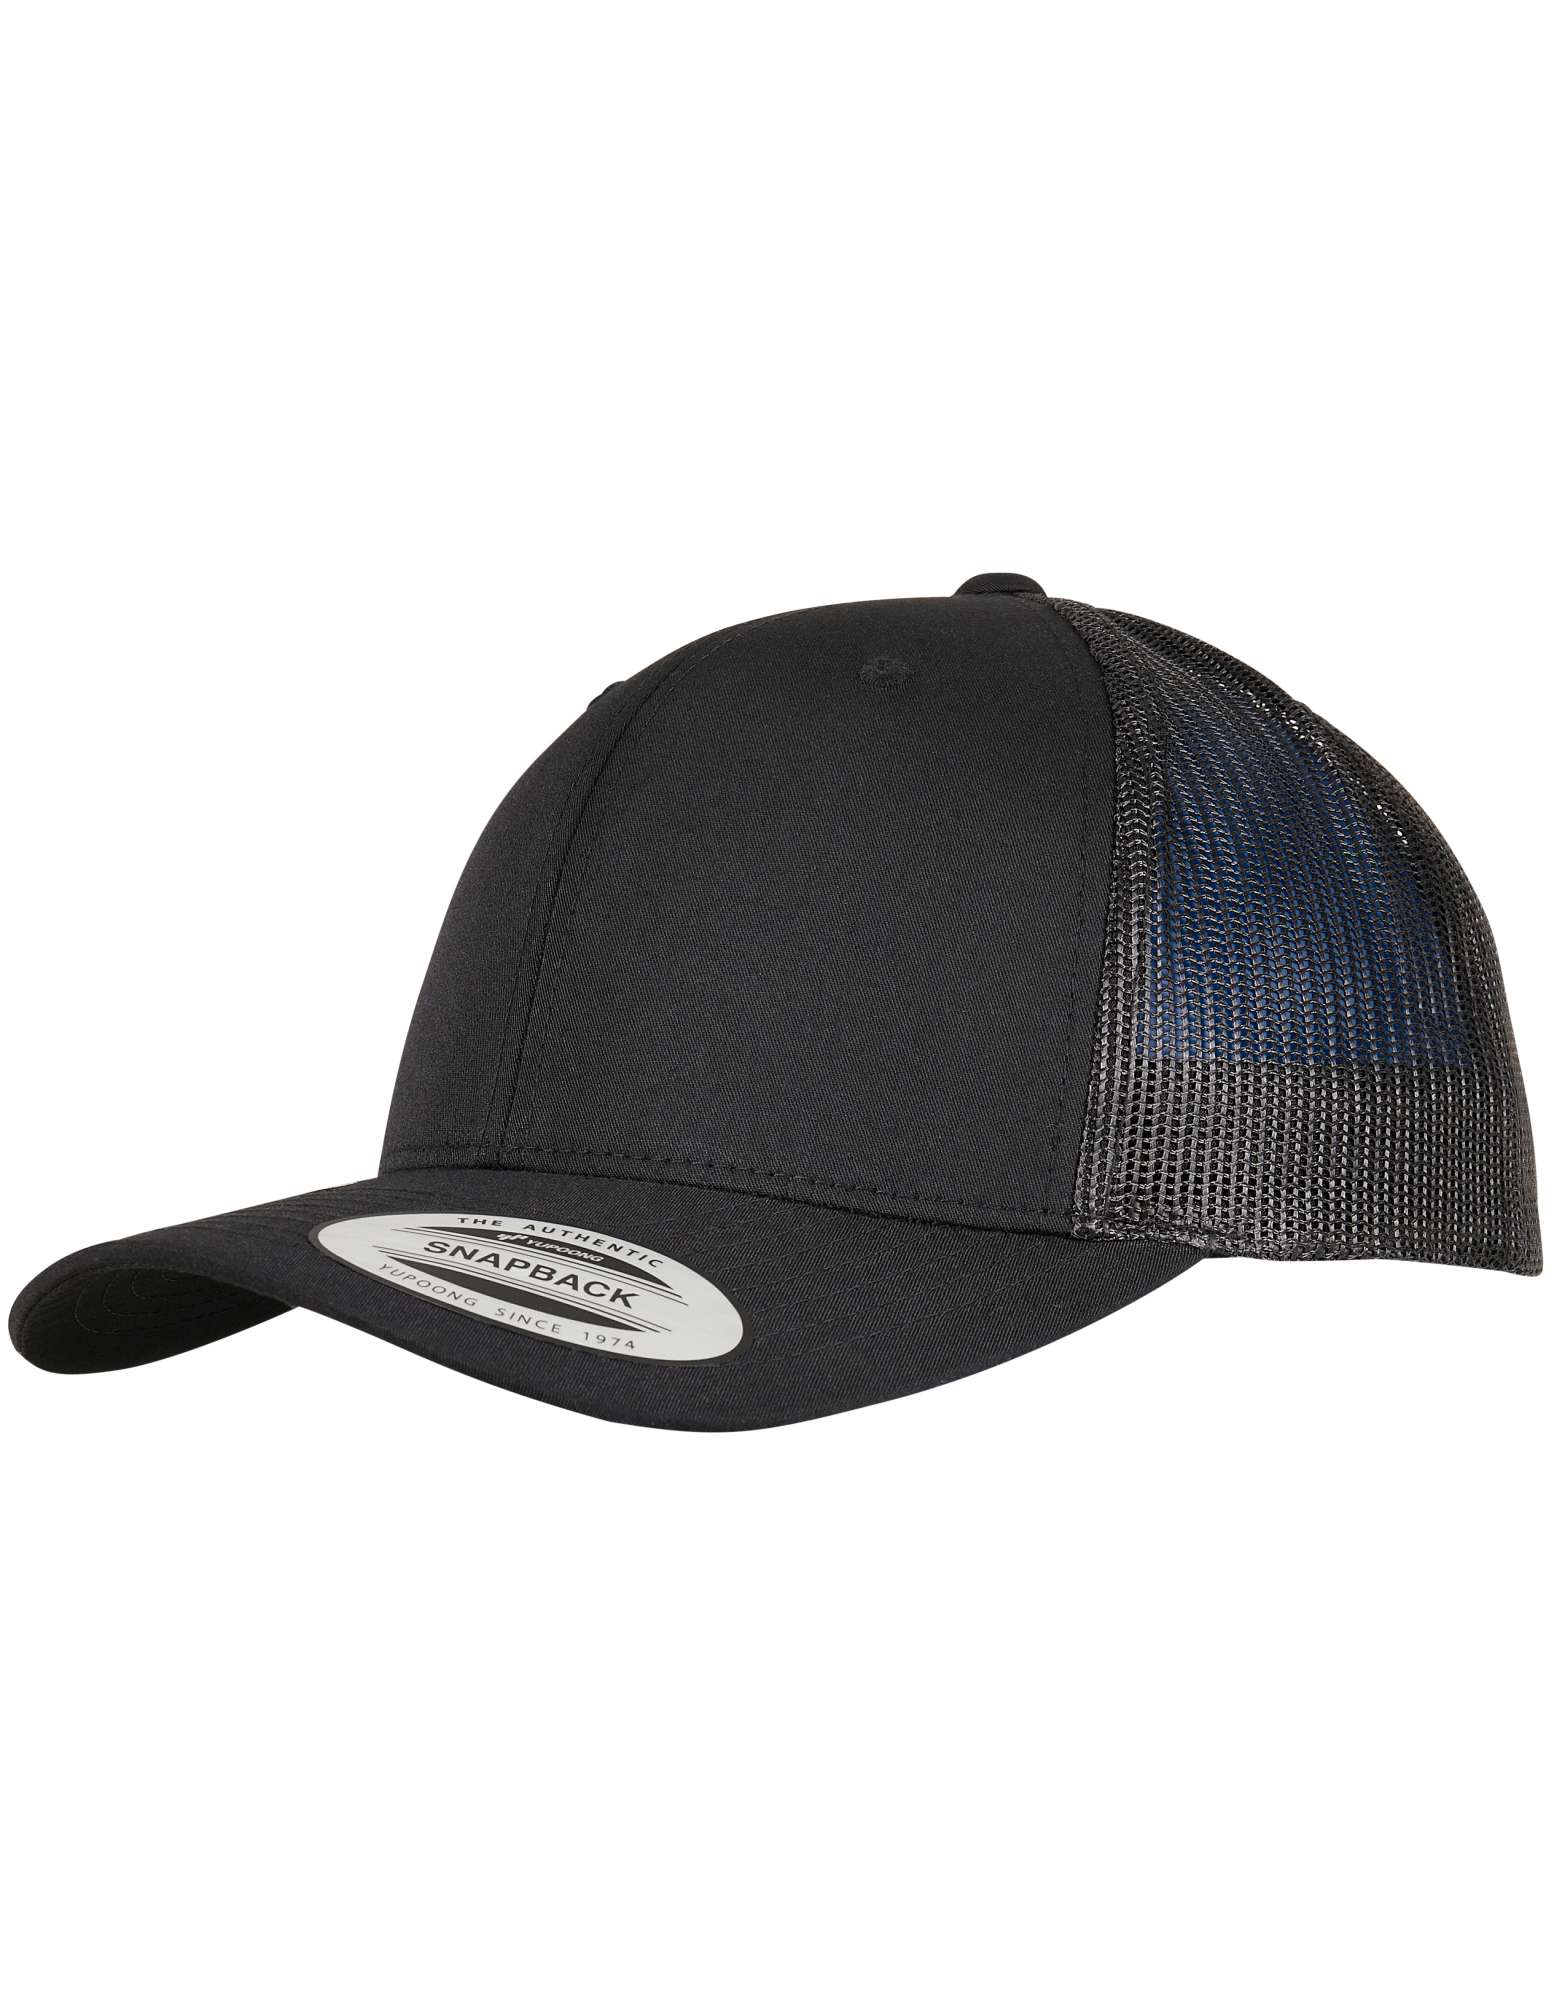 FLEXFIT Trucker Recycled Polyester Fabric Cap Black One Size (FX6606TR)